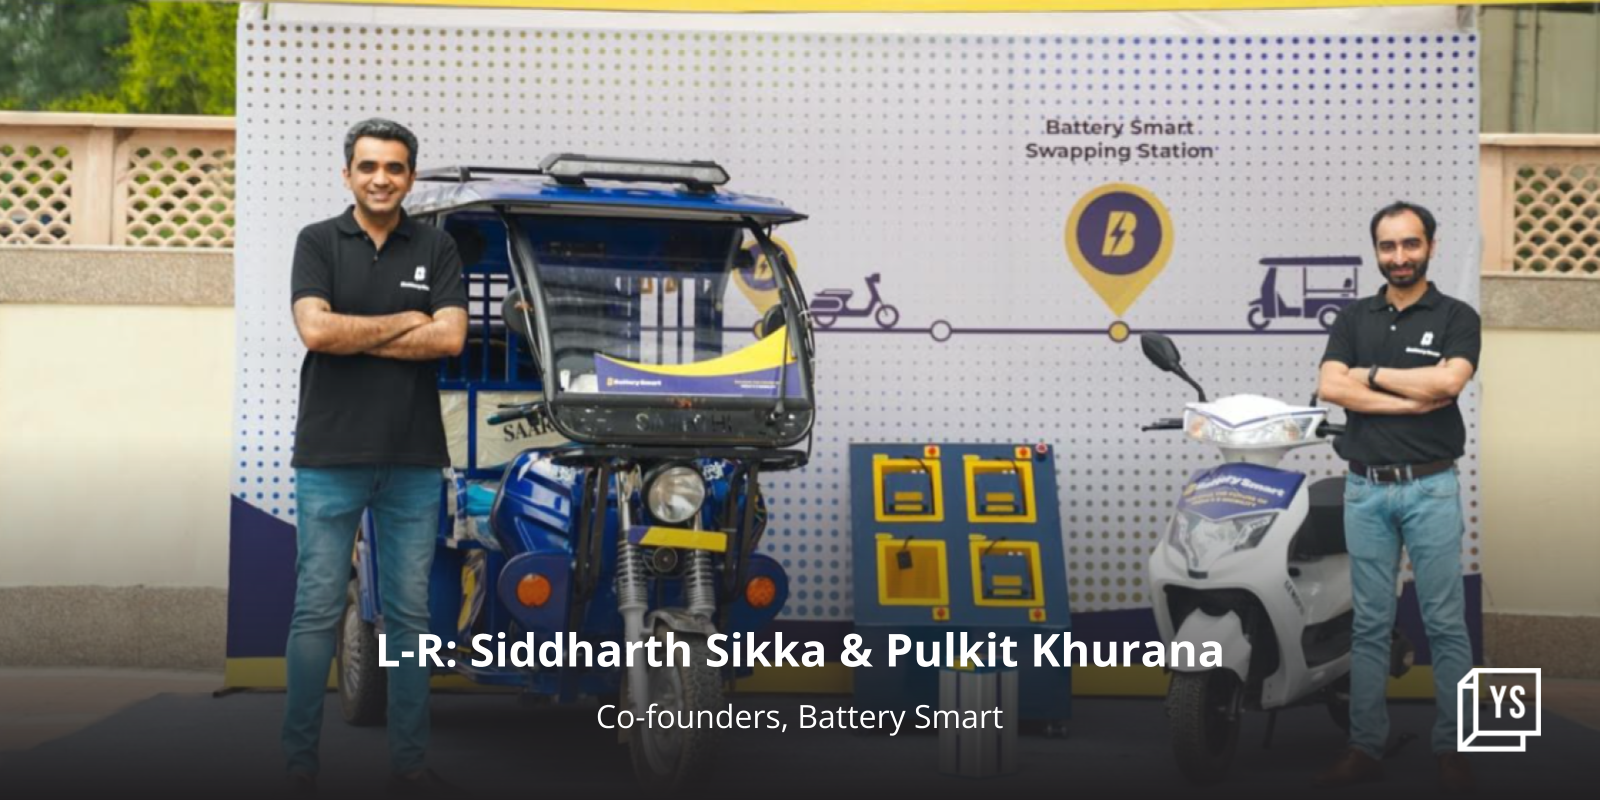 Battery Smart raises $25M in Series A round led by Tiger Global